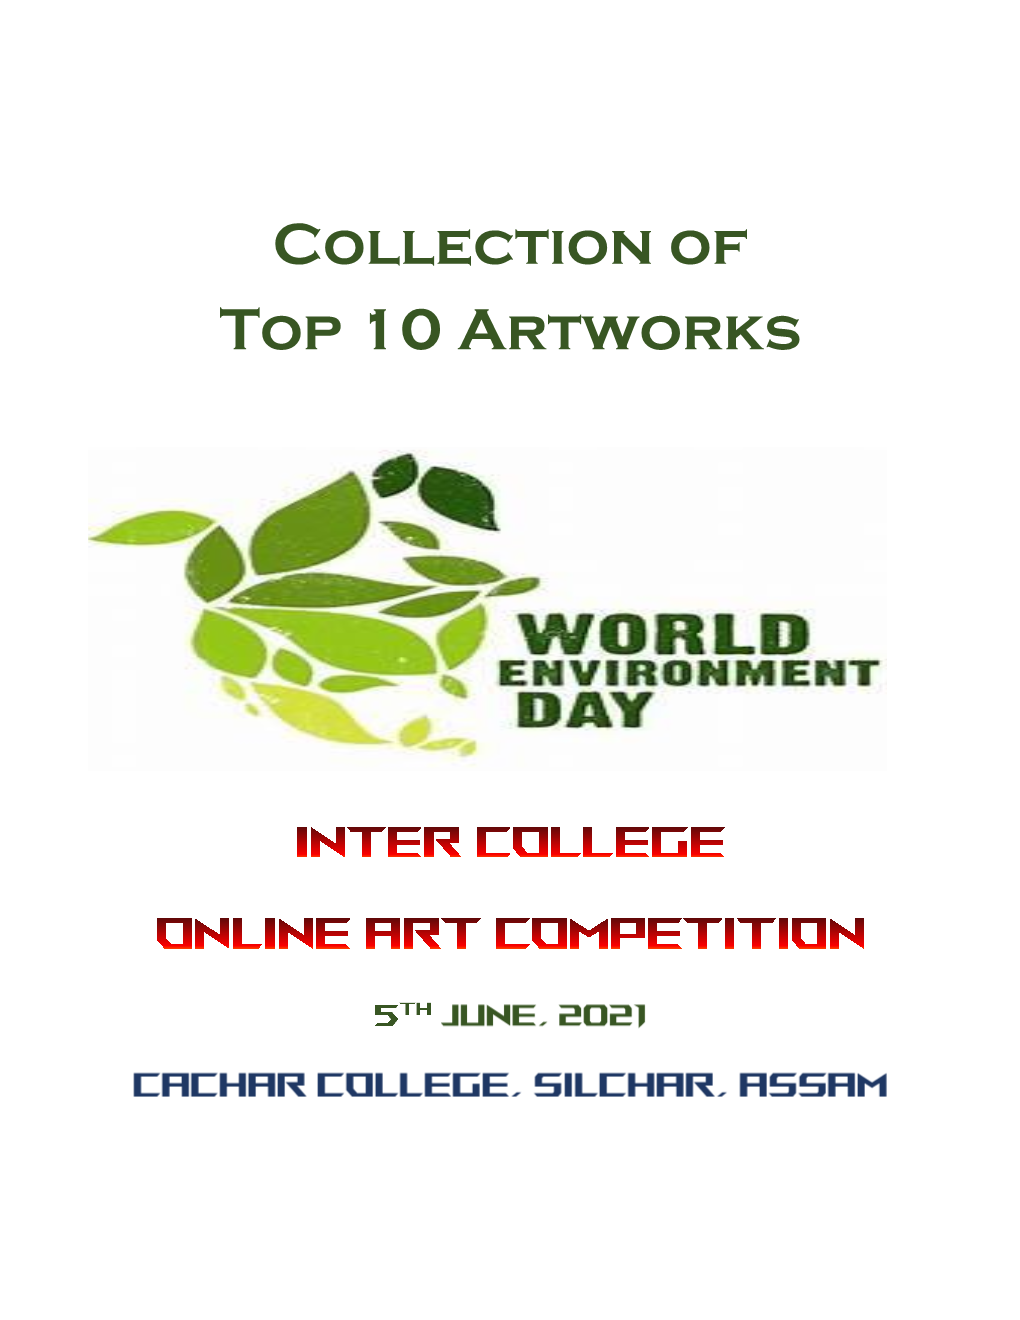 Collection of Top 10 Artworks